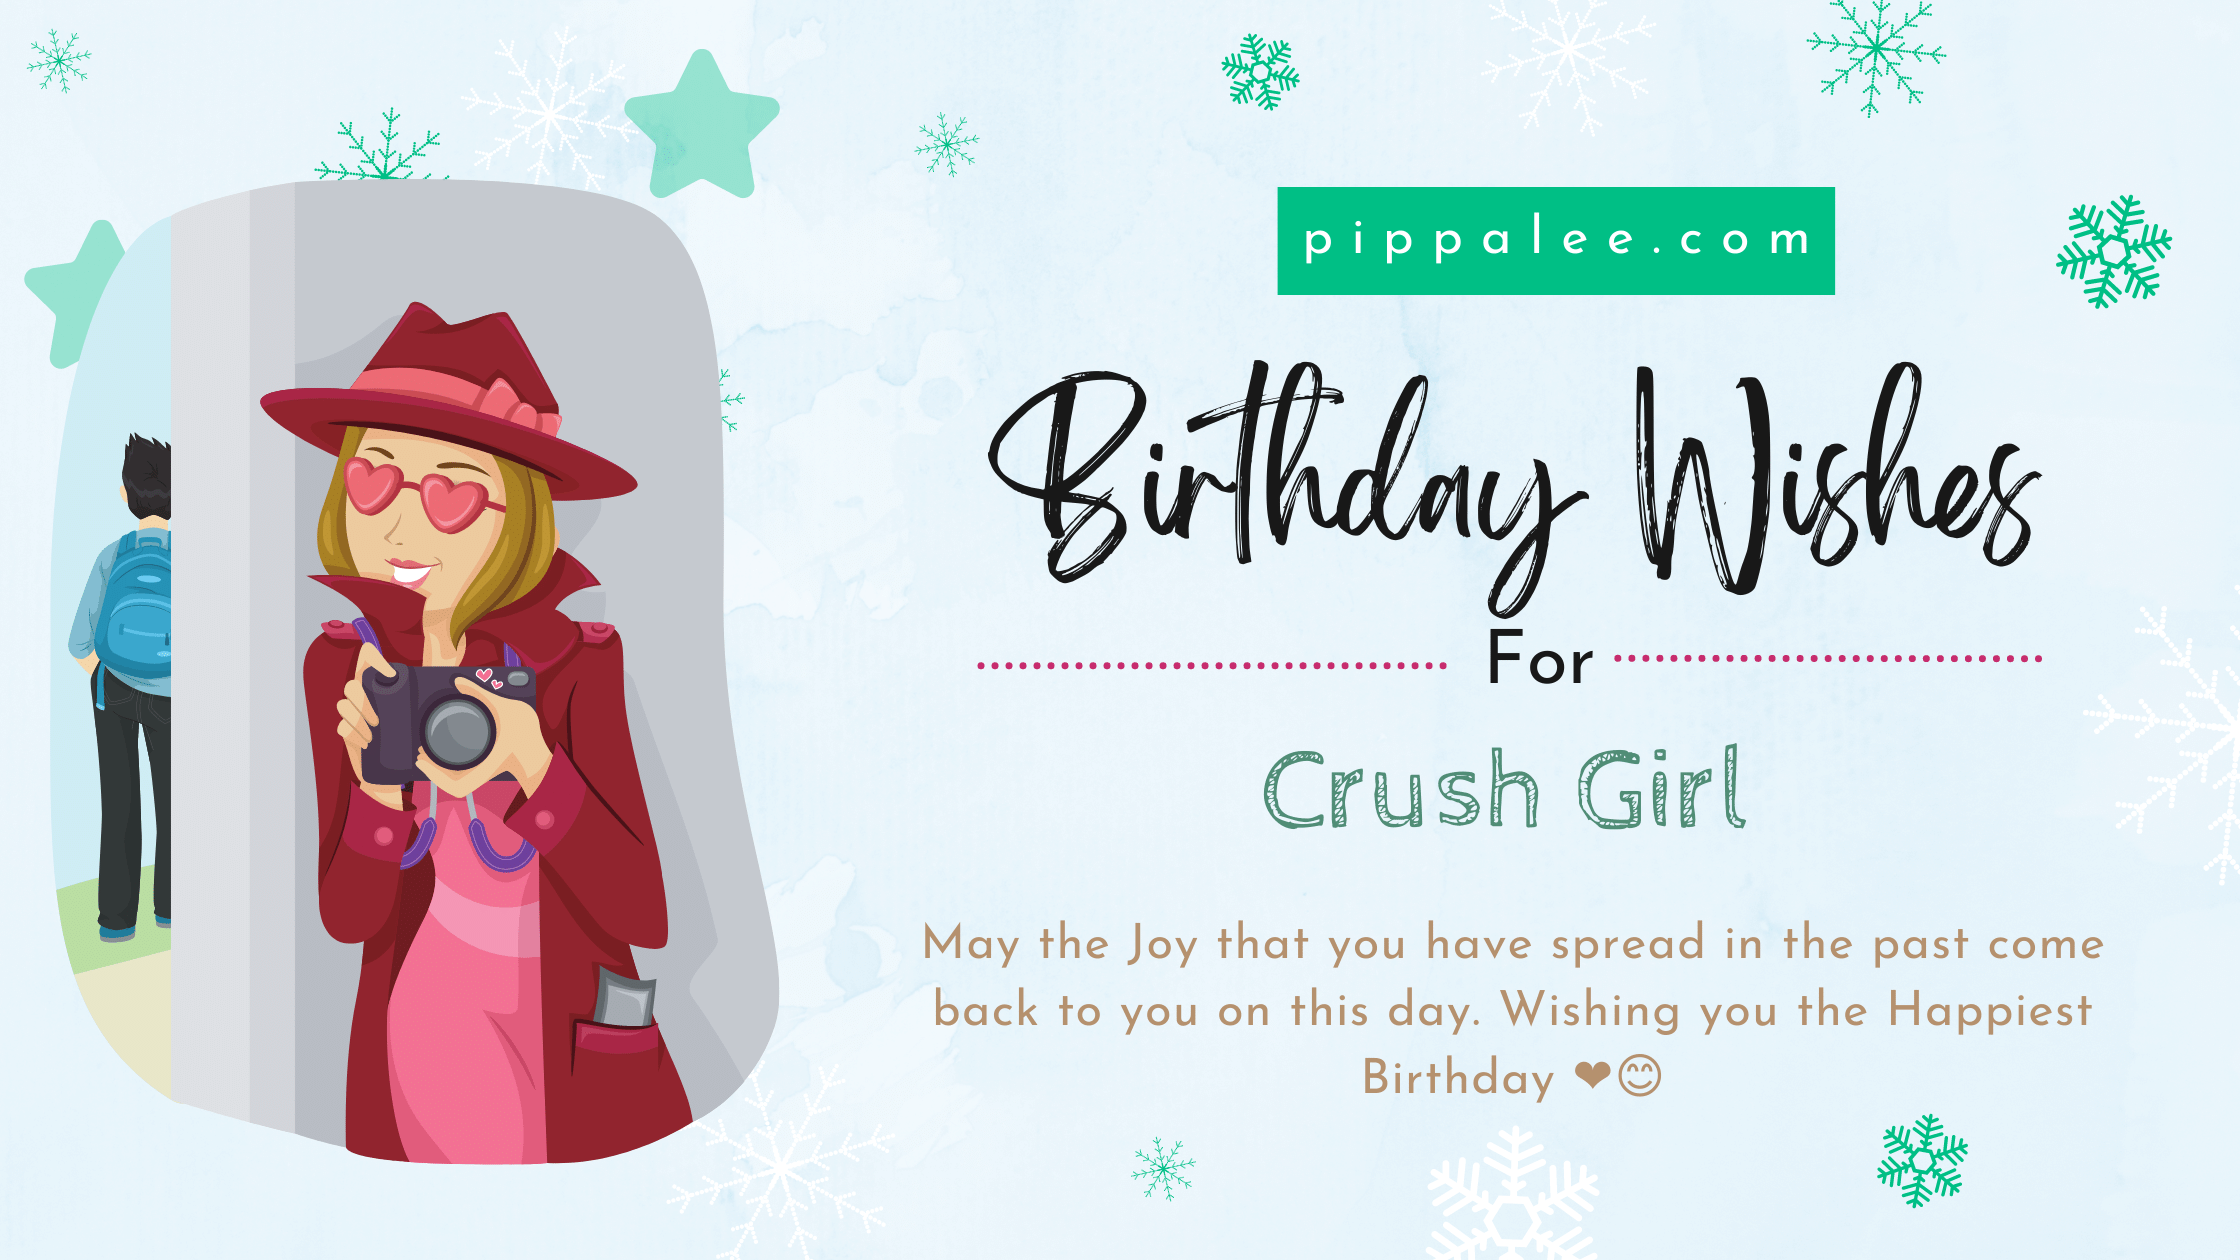 Birthday Wishes for Crush Girl - Wishes & Messages